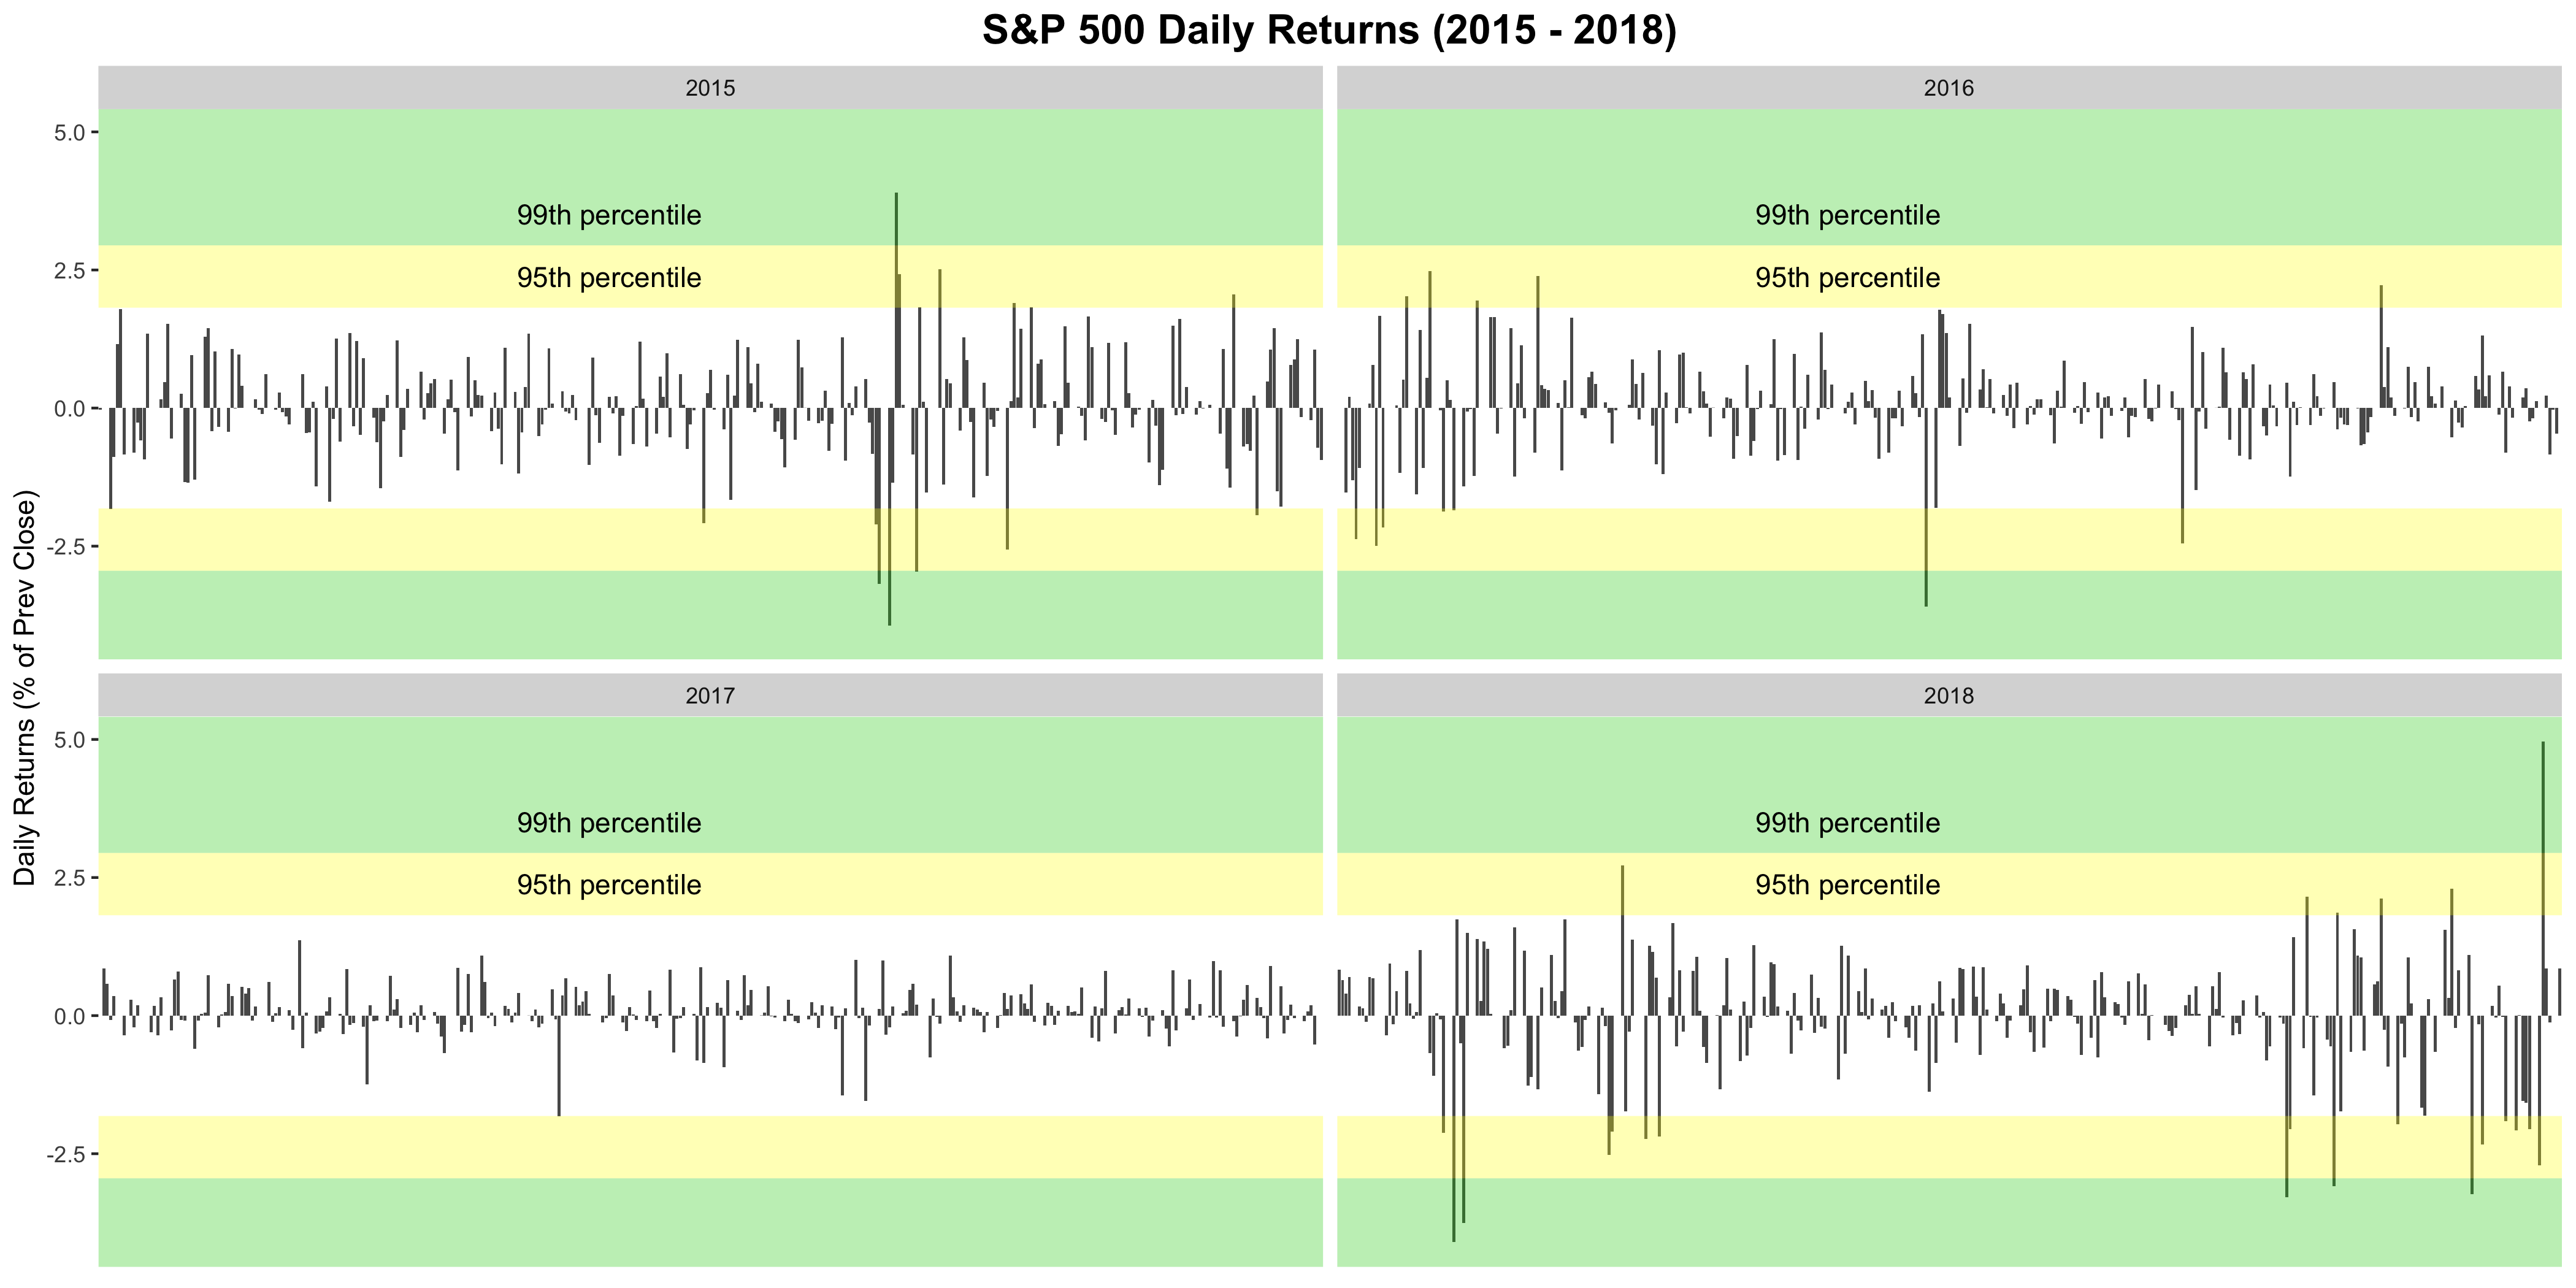 Daily moves of the S&P 500 index over a 4 year period